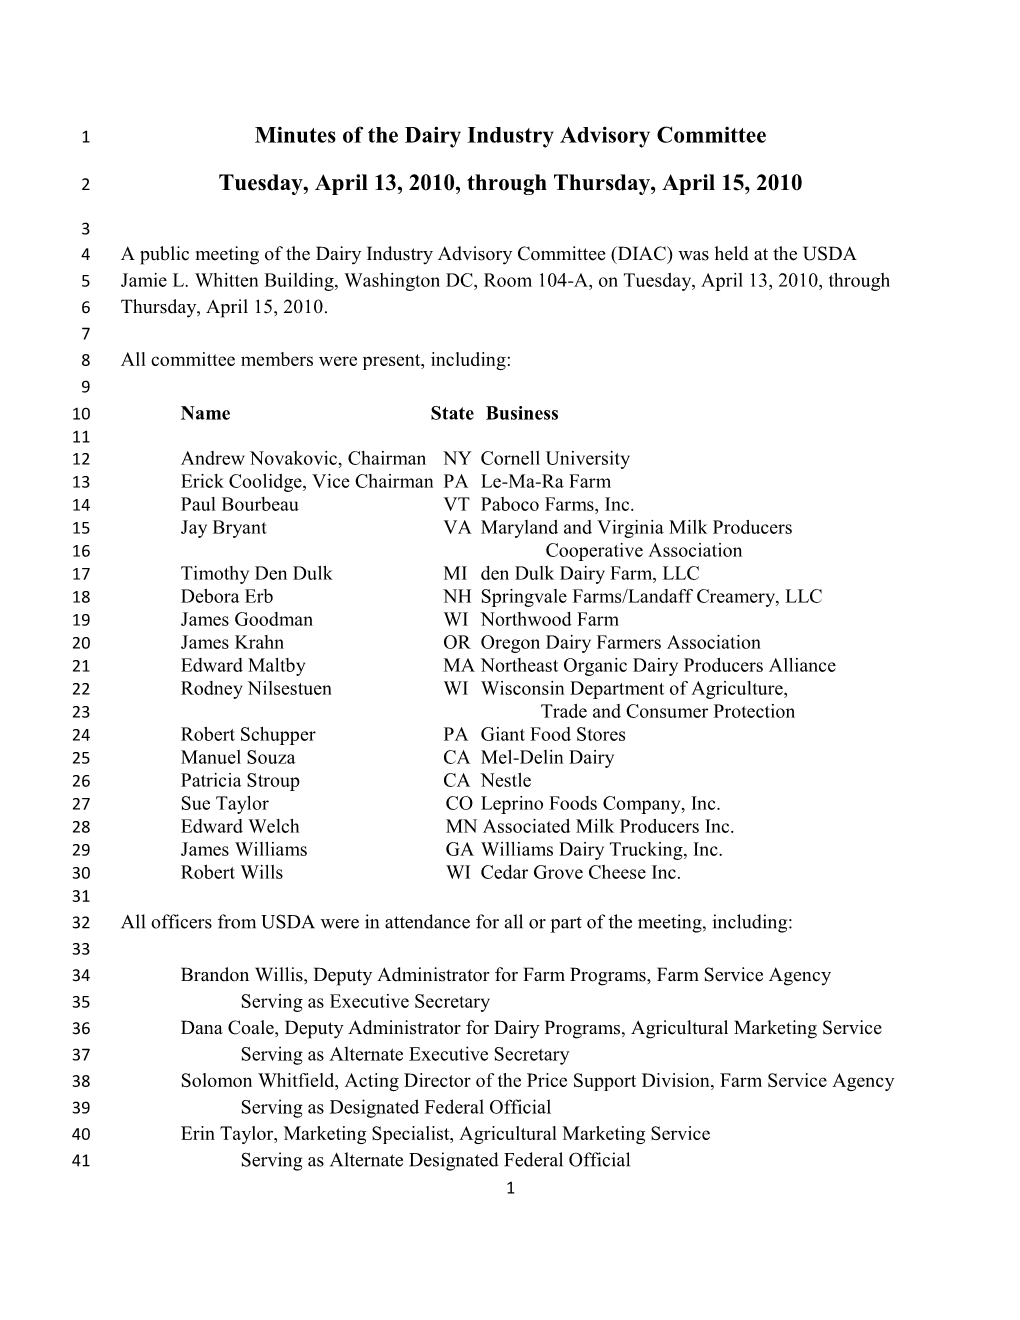 Minutes of the Dairy Industry Advisory Committee Tuesday, April 13, 2010